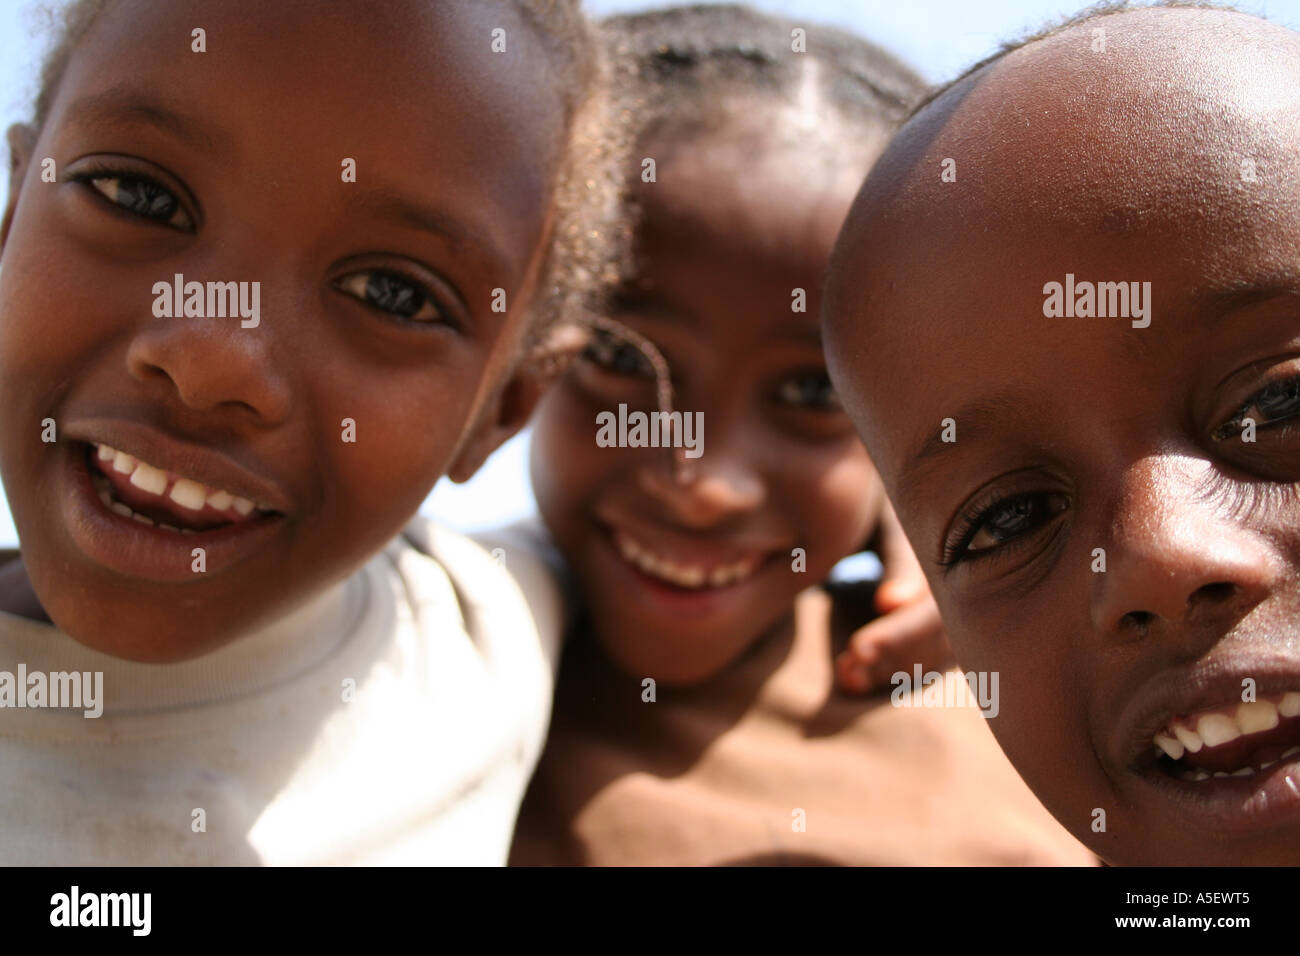 Harar, Ethiopia, Close up of young girls Stock Photo